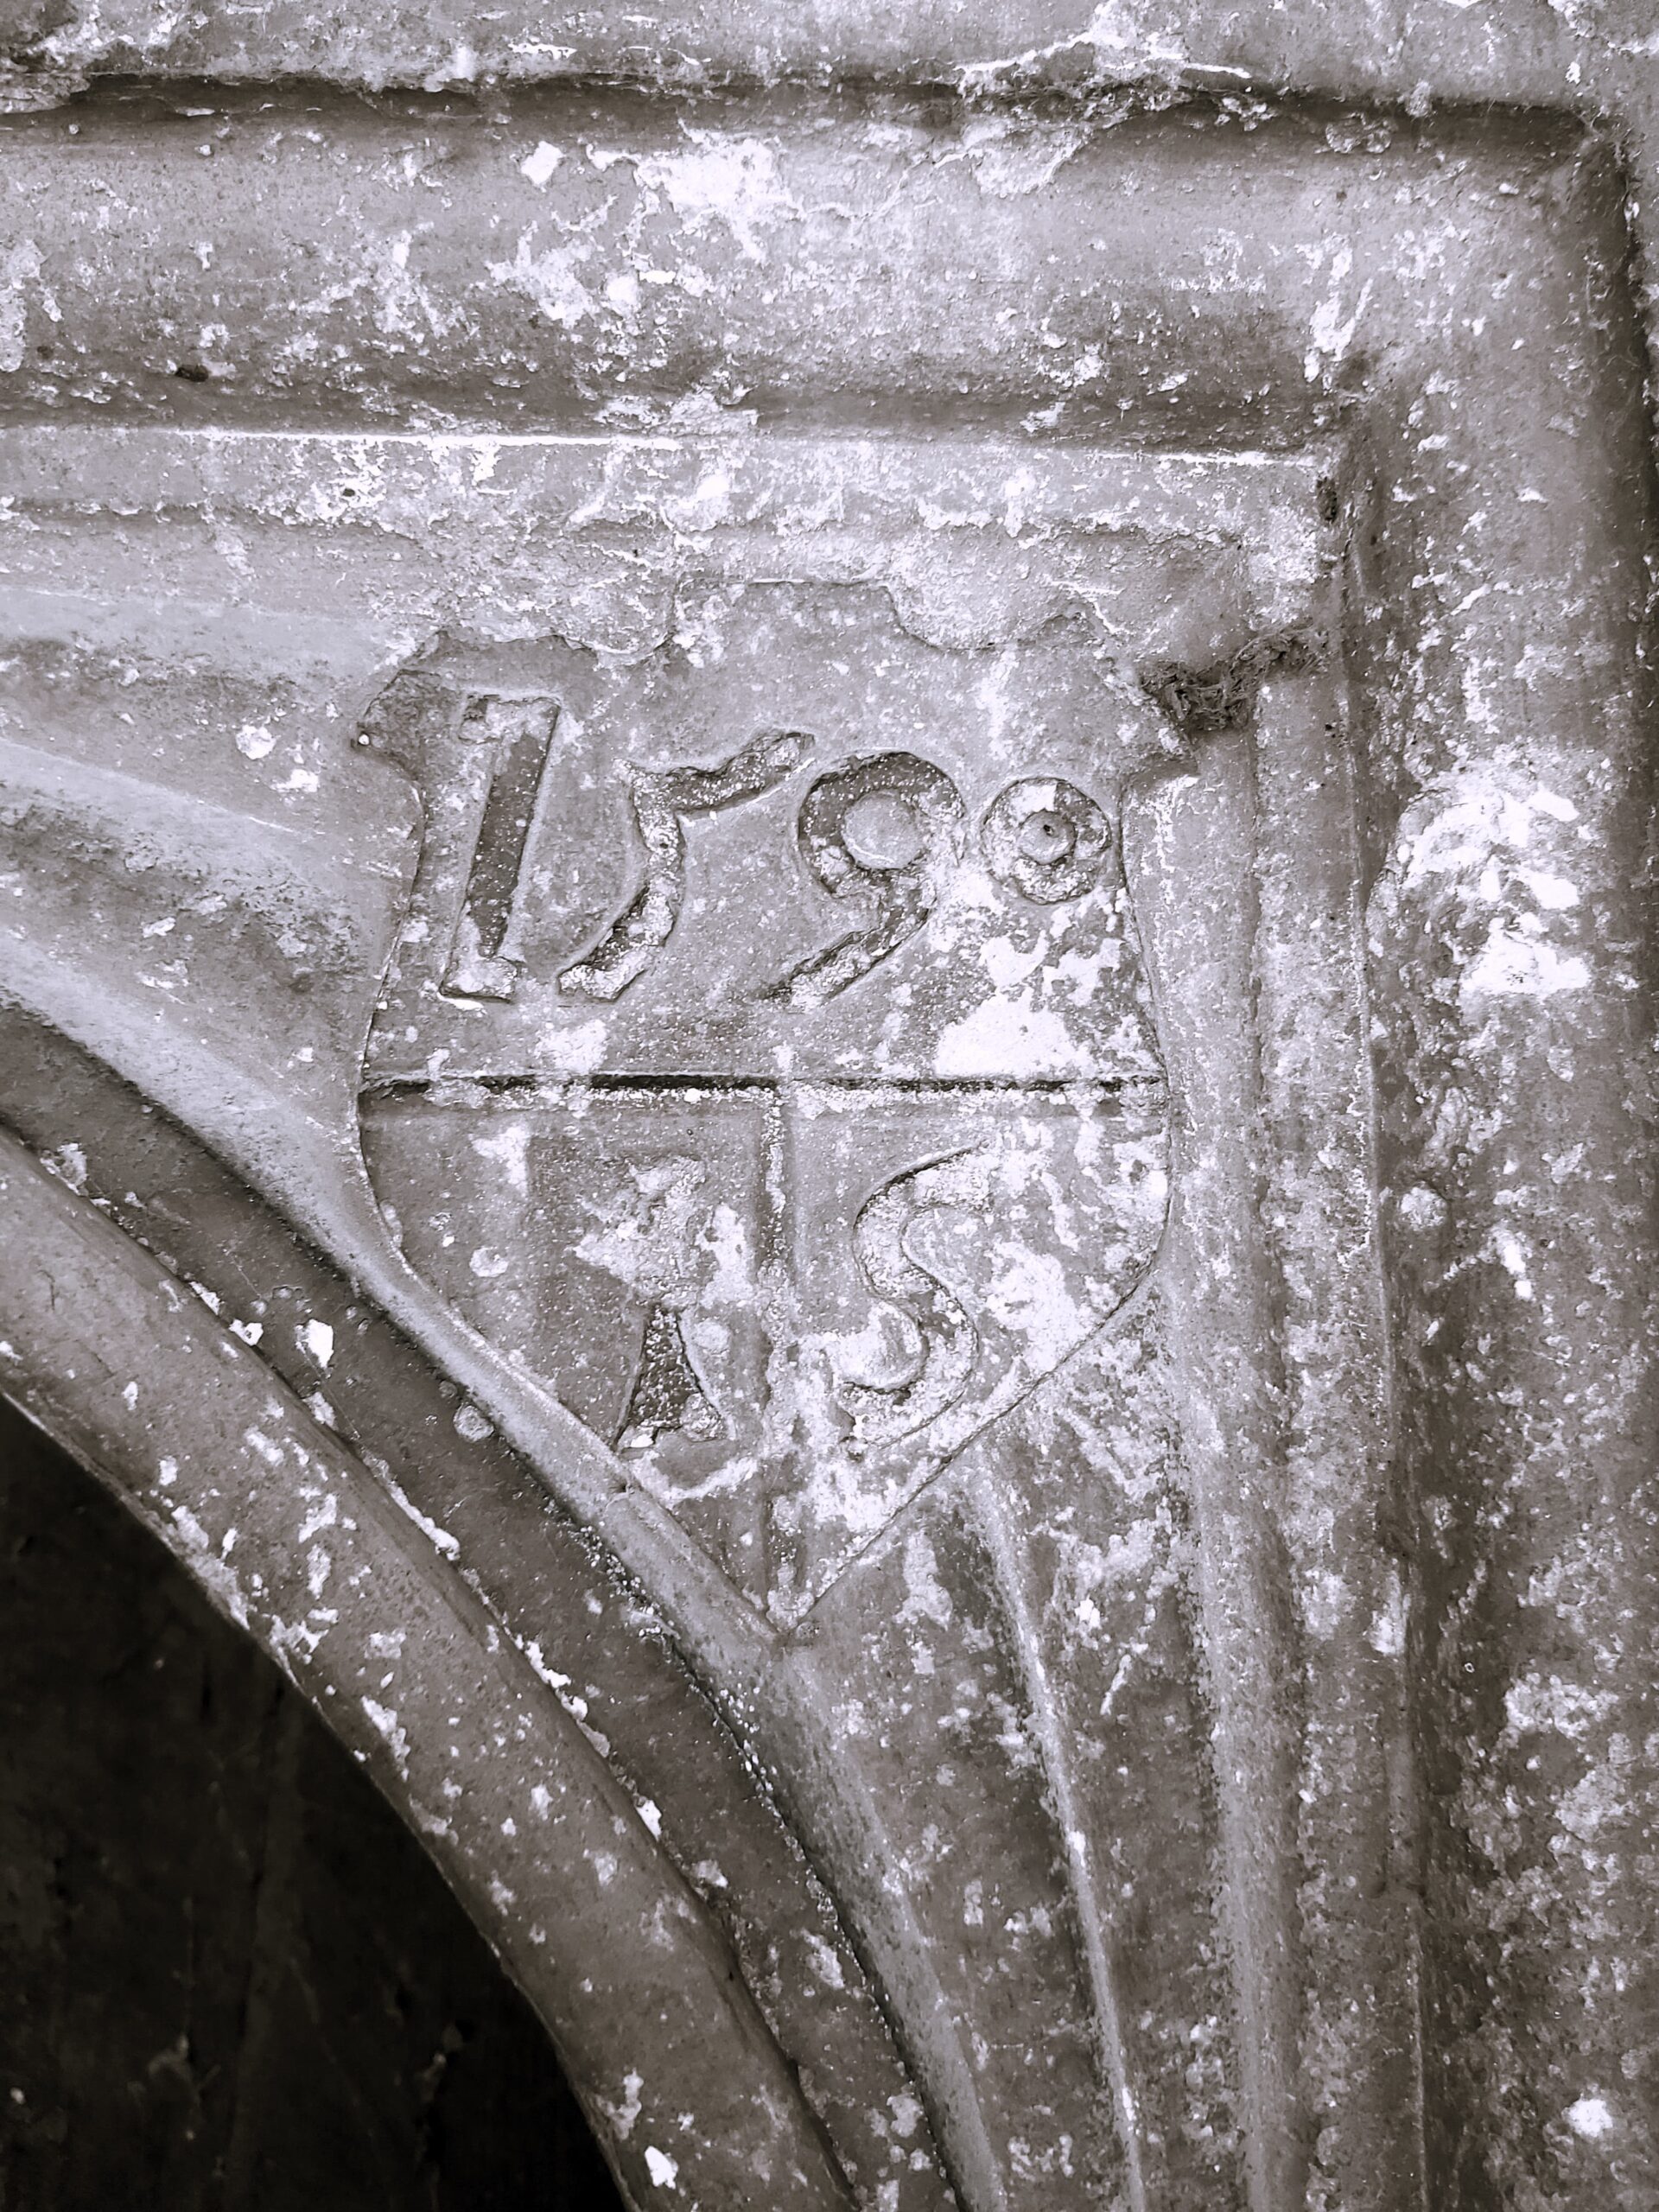 "1590" carved on a door frame in The Friars Aylesford Priory, Kent, England